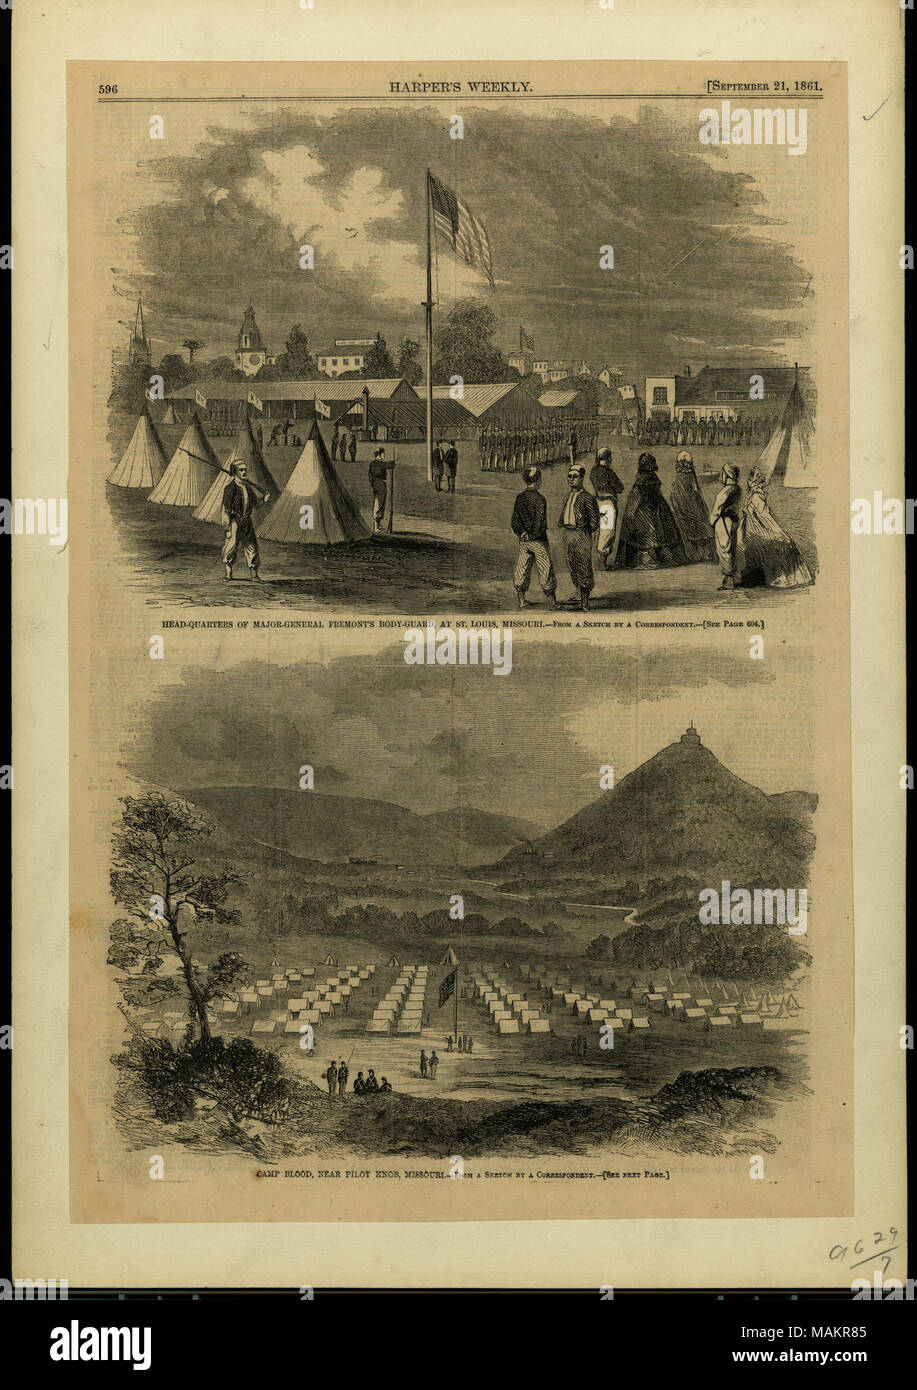 Image of buildings in background and soldiers in formation near a flagpole with a flag. Soldiers and three ladies in foreground near tents that have small flags with 'KY' written on them. '596 HARPER'S WEEKLY. [SEPTEMBER 21, 1861.' (printed above image). 'HEAD-QUARTERS OF MAJOR-GENERAL FREMONT'S BODY-GUARD, AT ST. LOUIS, MISSOURI. - FROM A SKETCH BY A CORRESPONDENT. - [SEE PAGE 604.]' (printed below image). Second image: Image of hills, train, and several small buildings in background. Soldiers, tents, and flagpole with flag in the foreground. 'CAMP BLOOD, NEAR PILOT KNOB, MISSOURI. - FROM A S Stock Photo